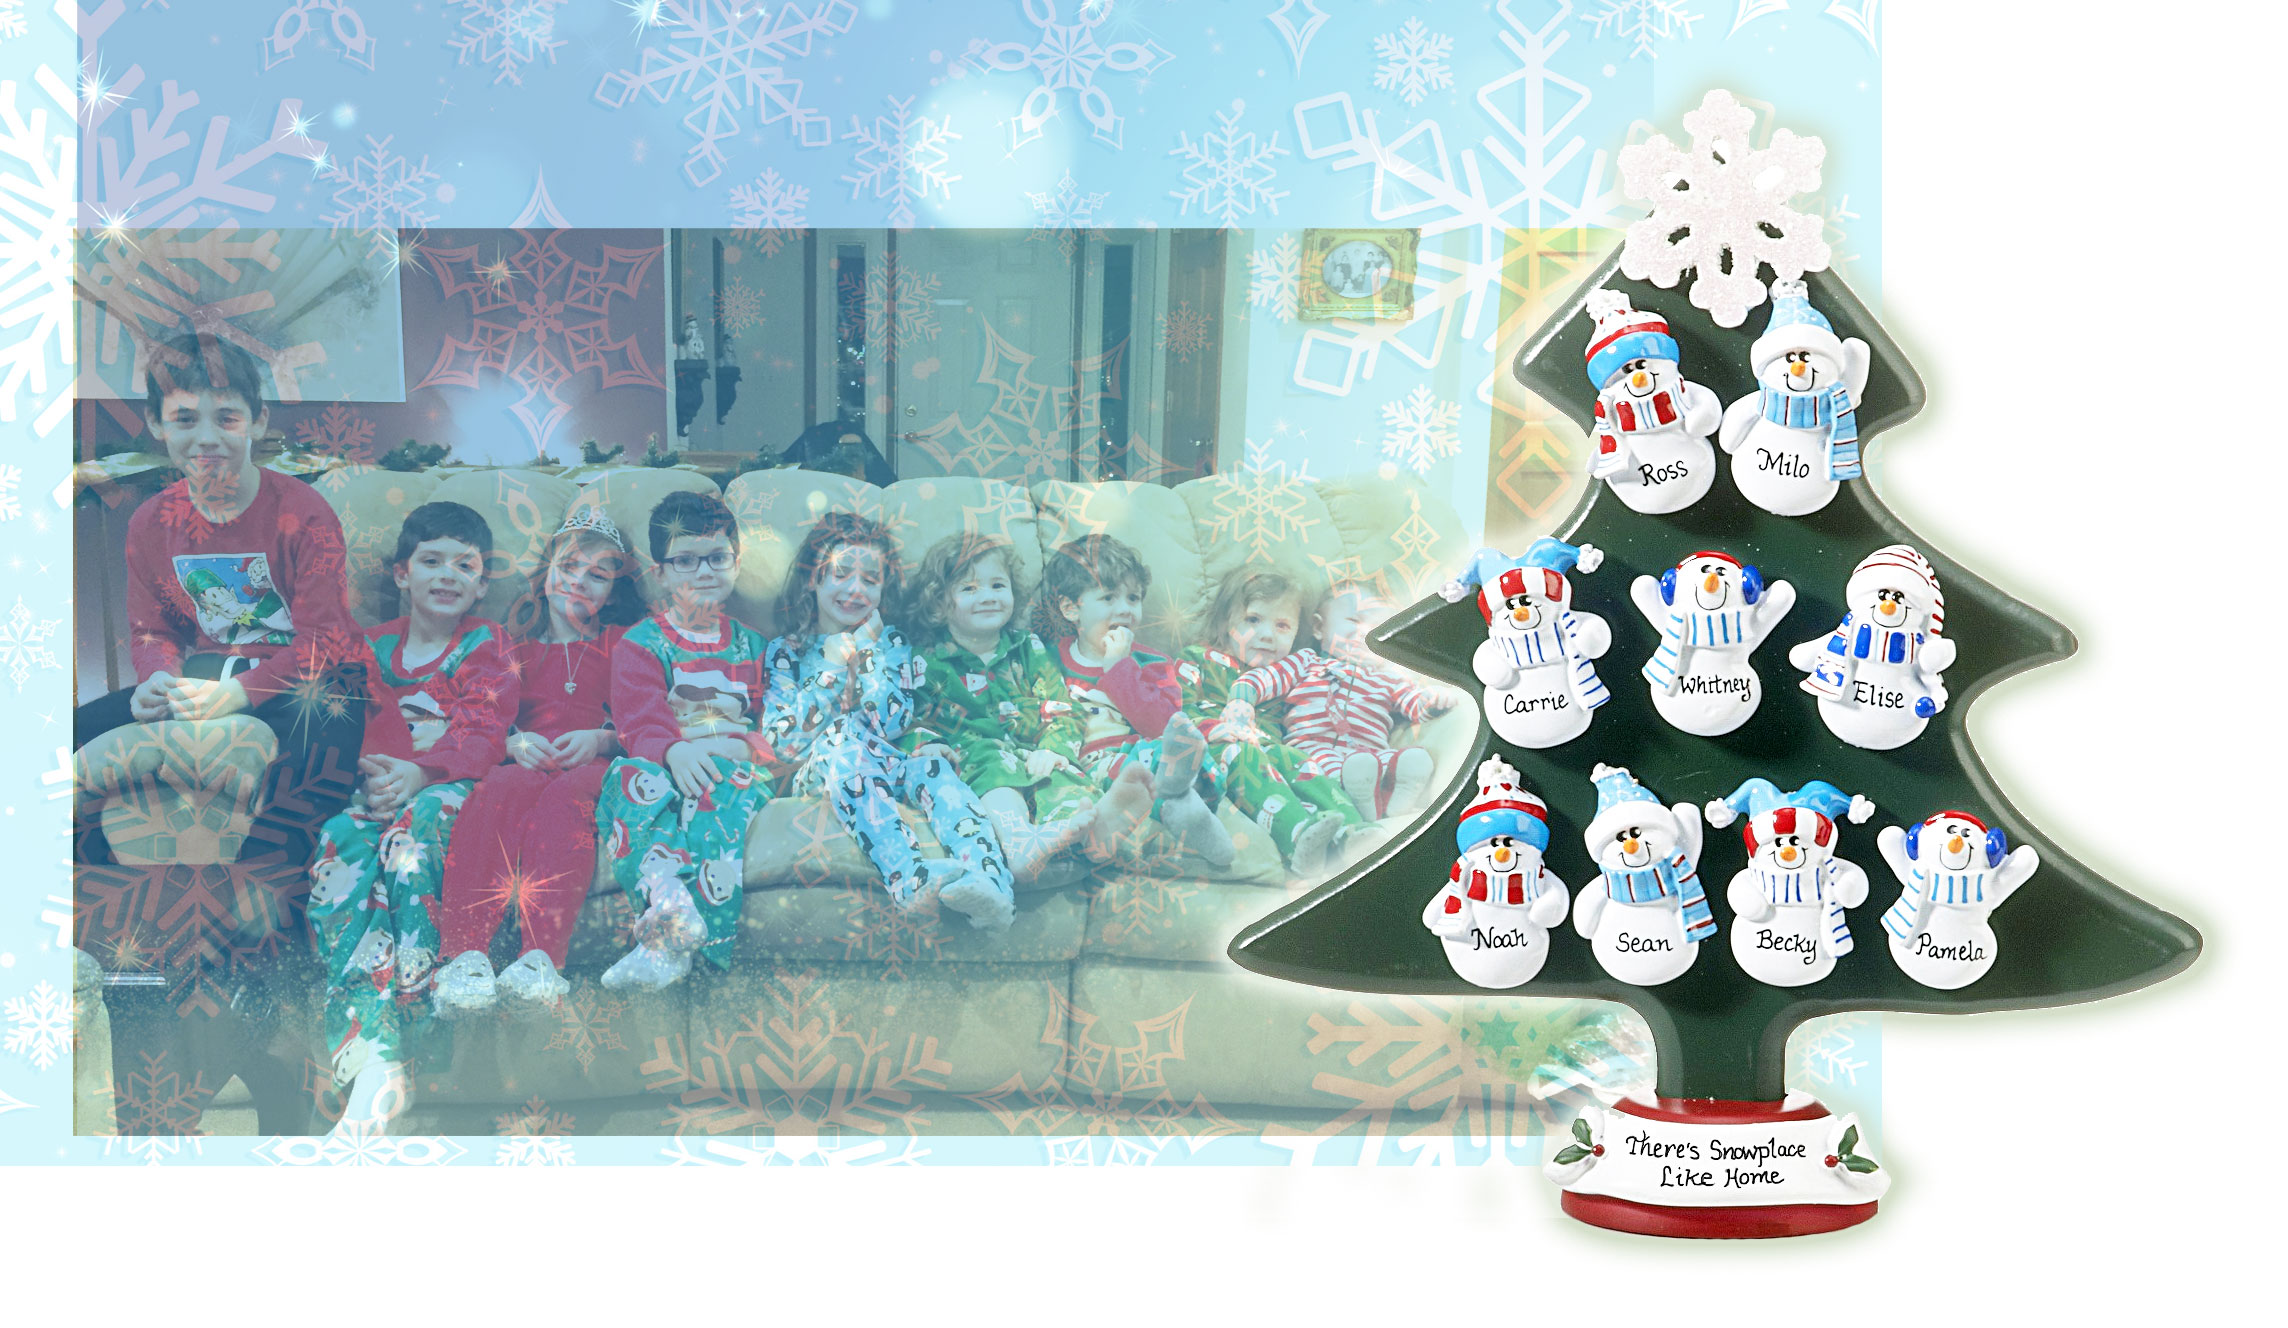 A table decoration ornament with snowman to represent personalized family members. | OrnamentShop.com